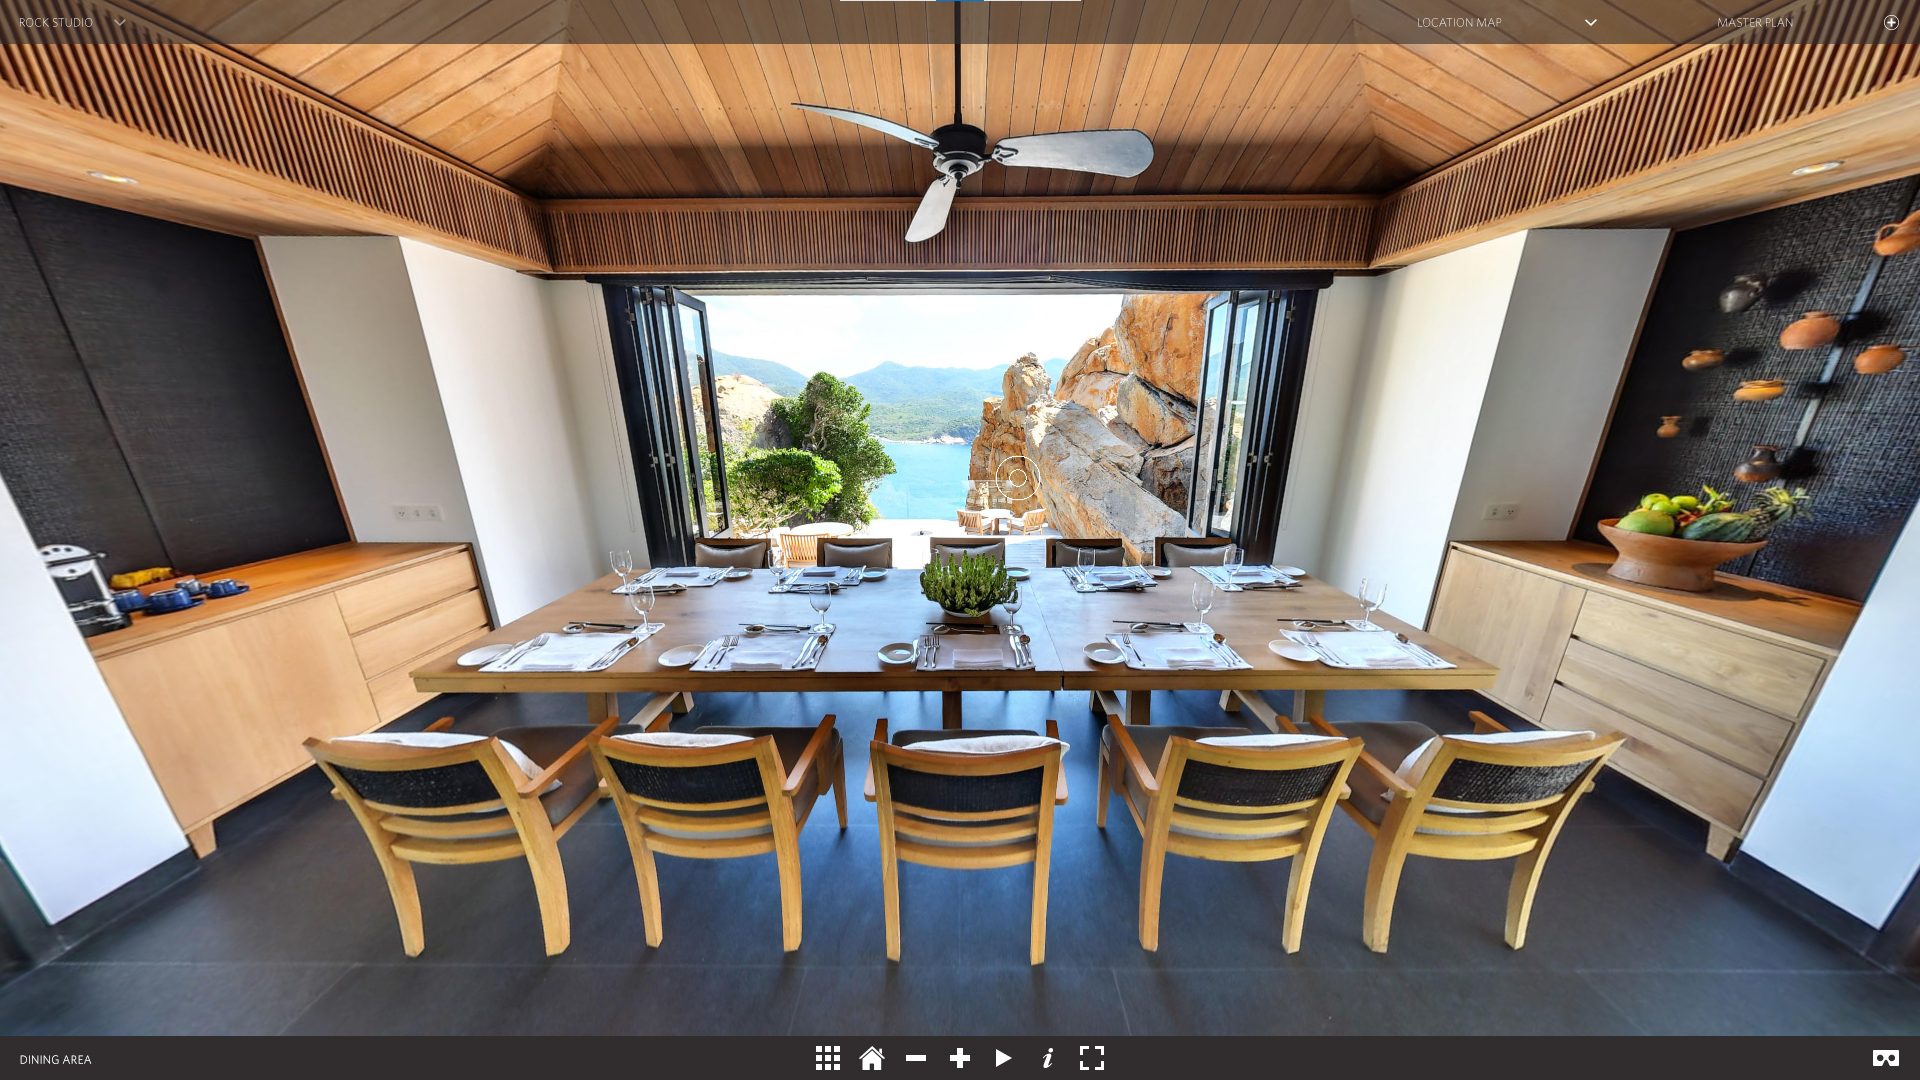 360 photo of a living room sala, with a gorgeous view on the cliff and sea behind. Wooden decor and dining table.